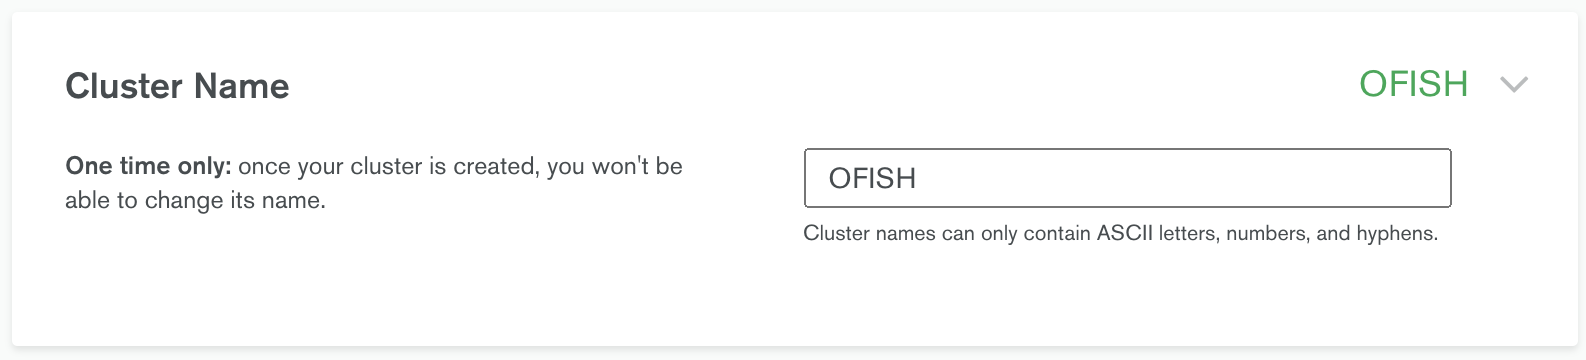 Type your cluster name